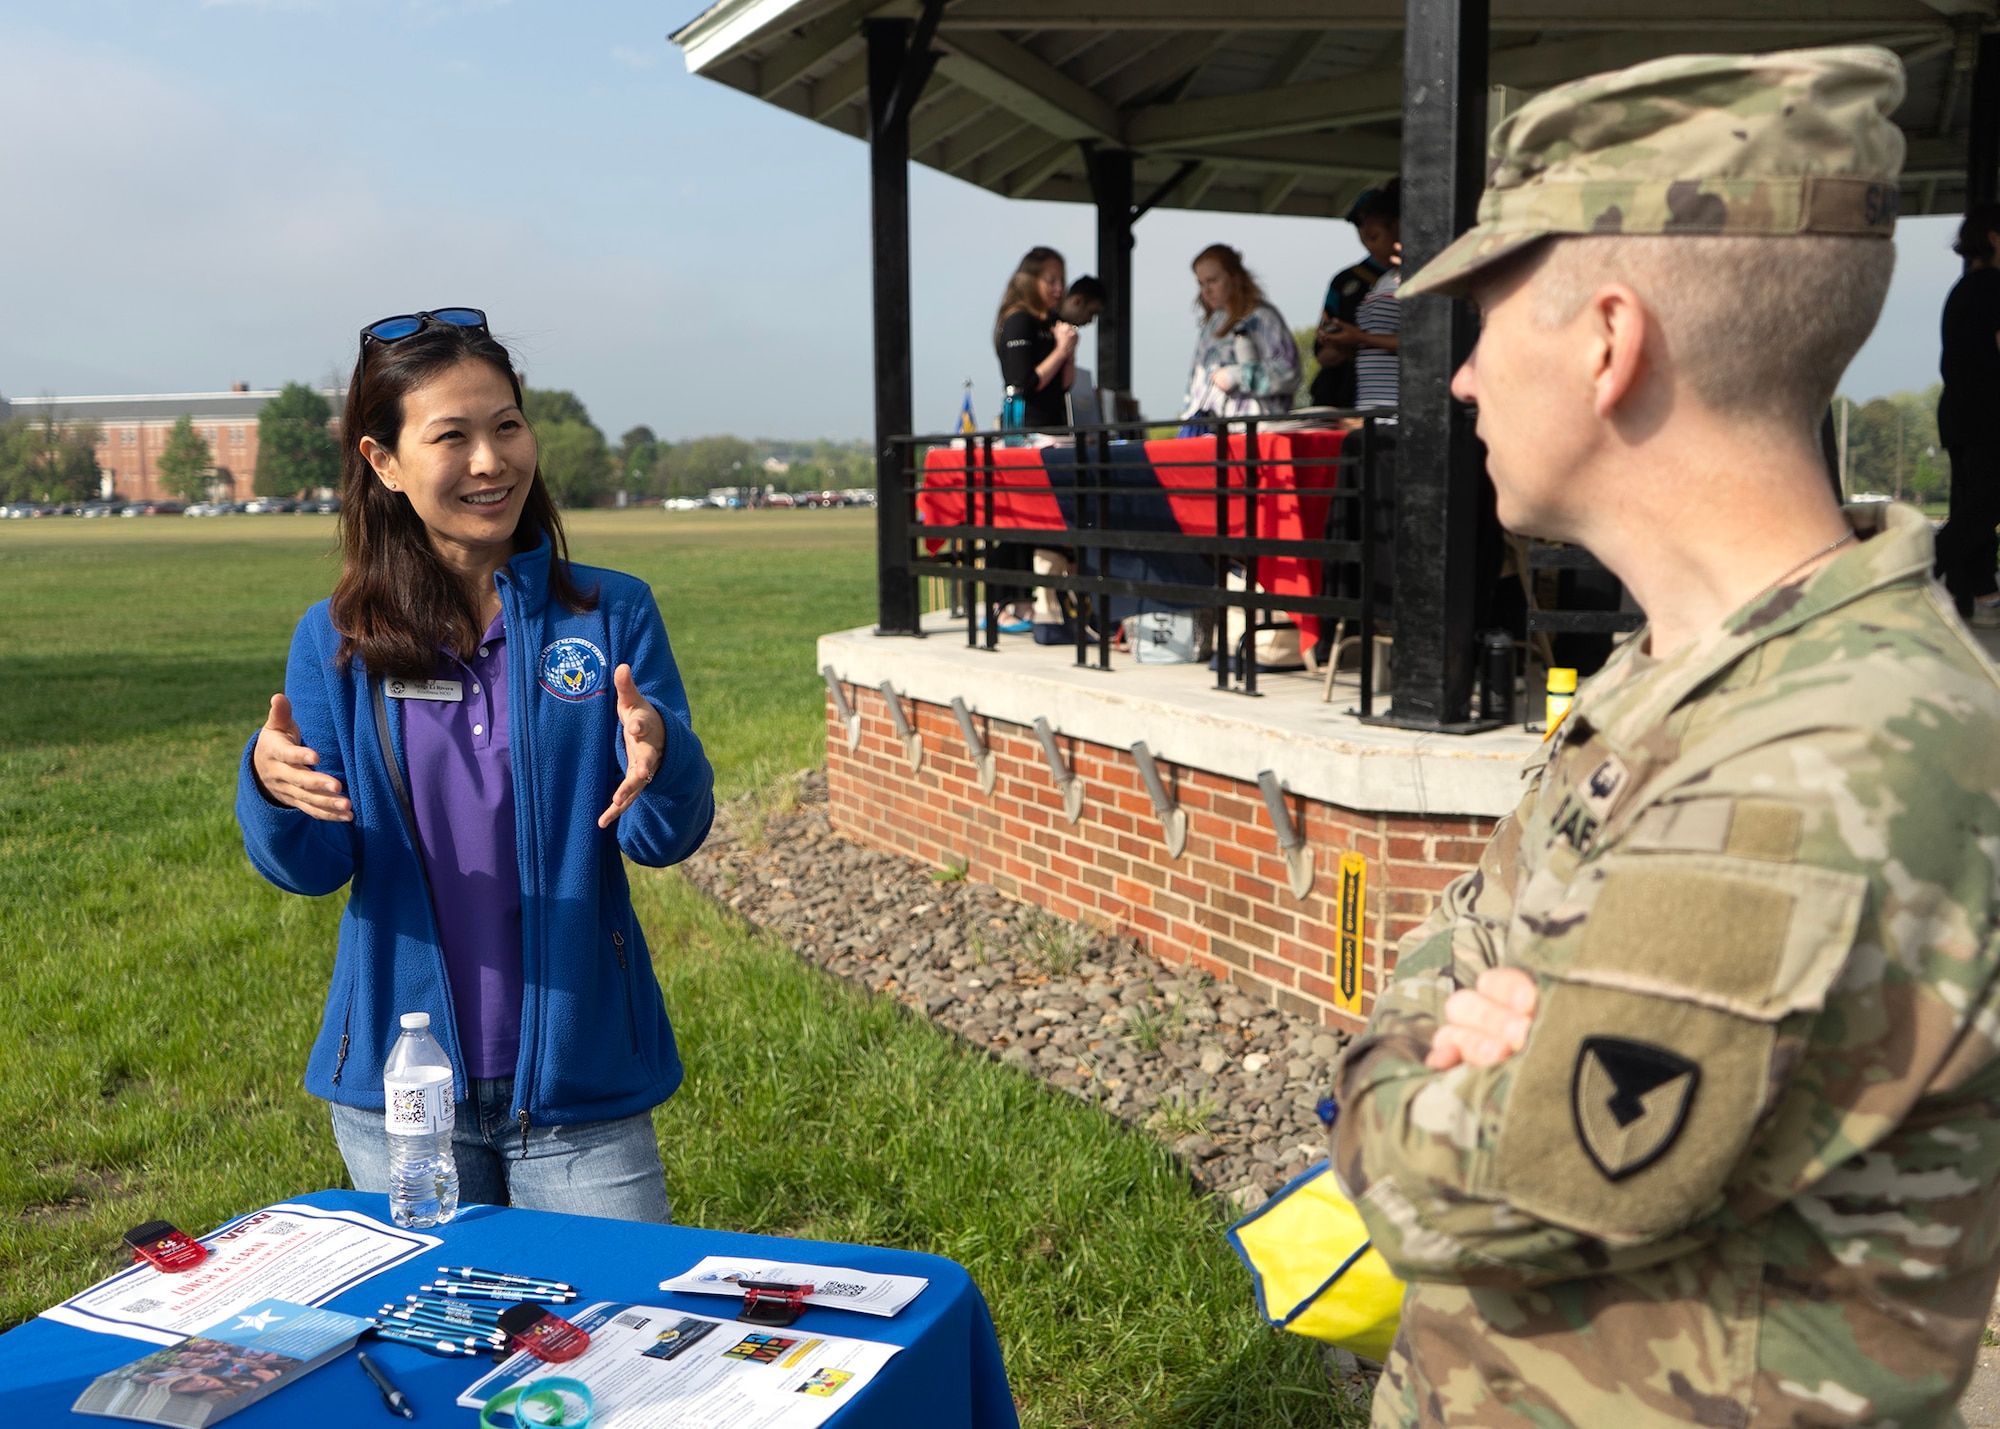 U.S. Air Force Master Sgt. Li Rivera, 707th Force Support Squadron noncommissioned officer in charge of readiness, speaks with U.S. Army Col. Michael Sapp, Fort George G. Meade garrison commander, during a Suicide Awareness Walk, April 21, 2023, at Fort Meade, Maryland. Rivera informed Sapp of the helping agencies that are available to the Fort Meade community to care for one another, build resiliency, increase morale and raise suicide prevention awareness. (U.S. Air Force photo by Staff Sgt. Kevin Iinuma)